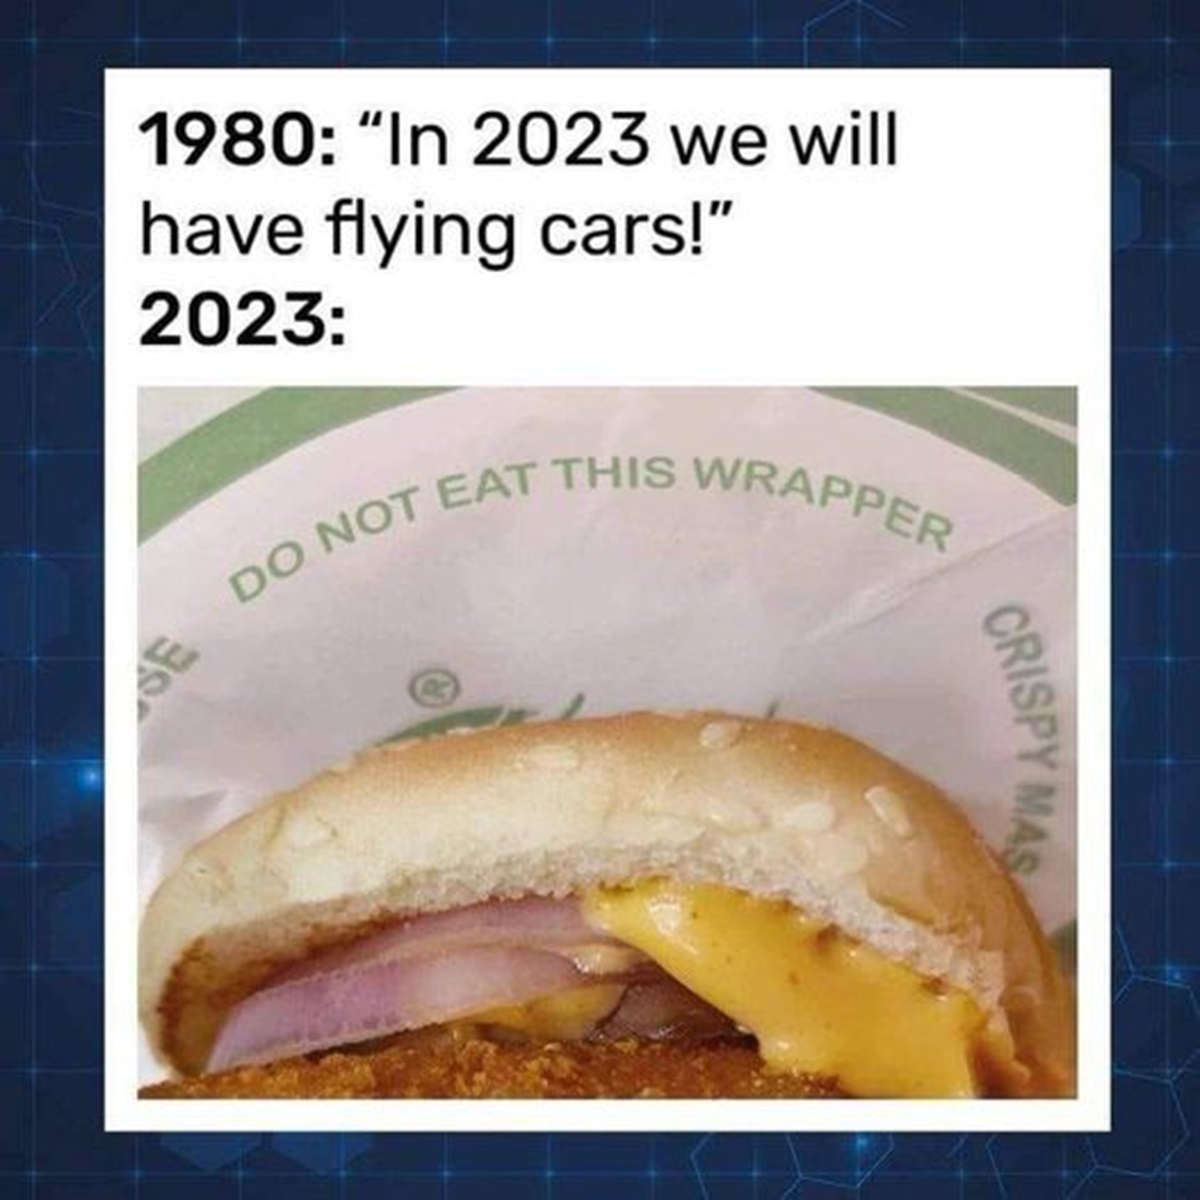 2023 we will have flying cars - Se 1980 "In 2023 we will have flying cars!" 2023 Do Not Eat This Wrapper Crispy Mas